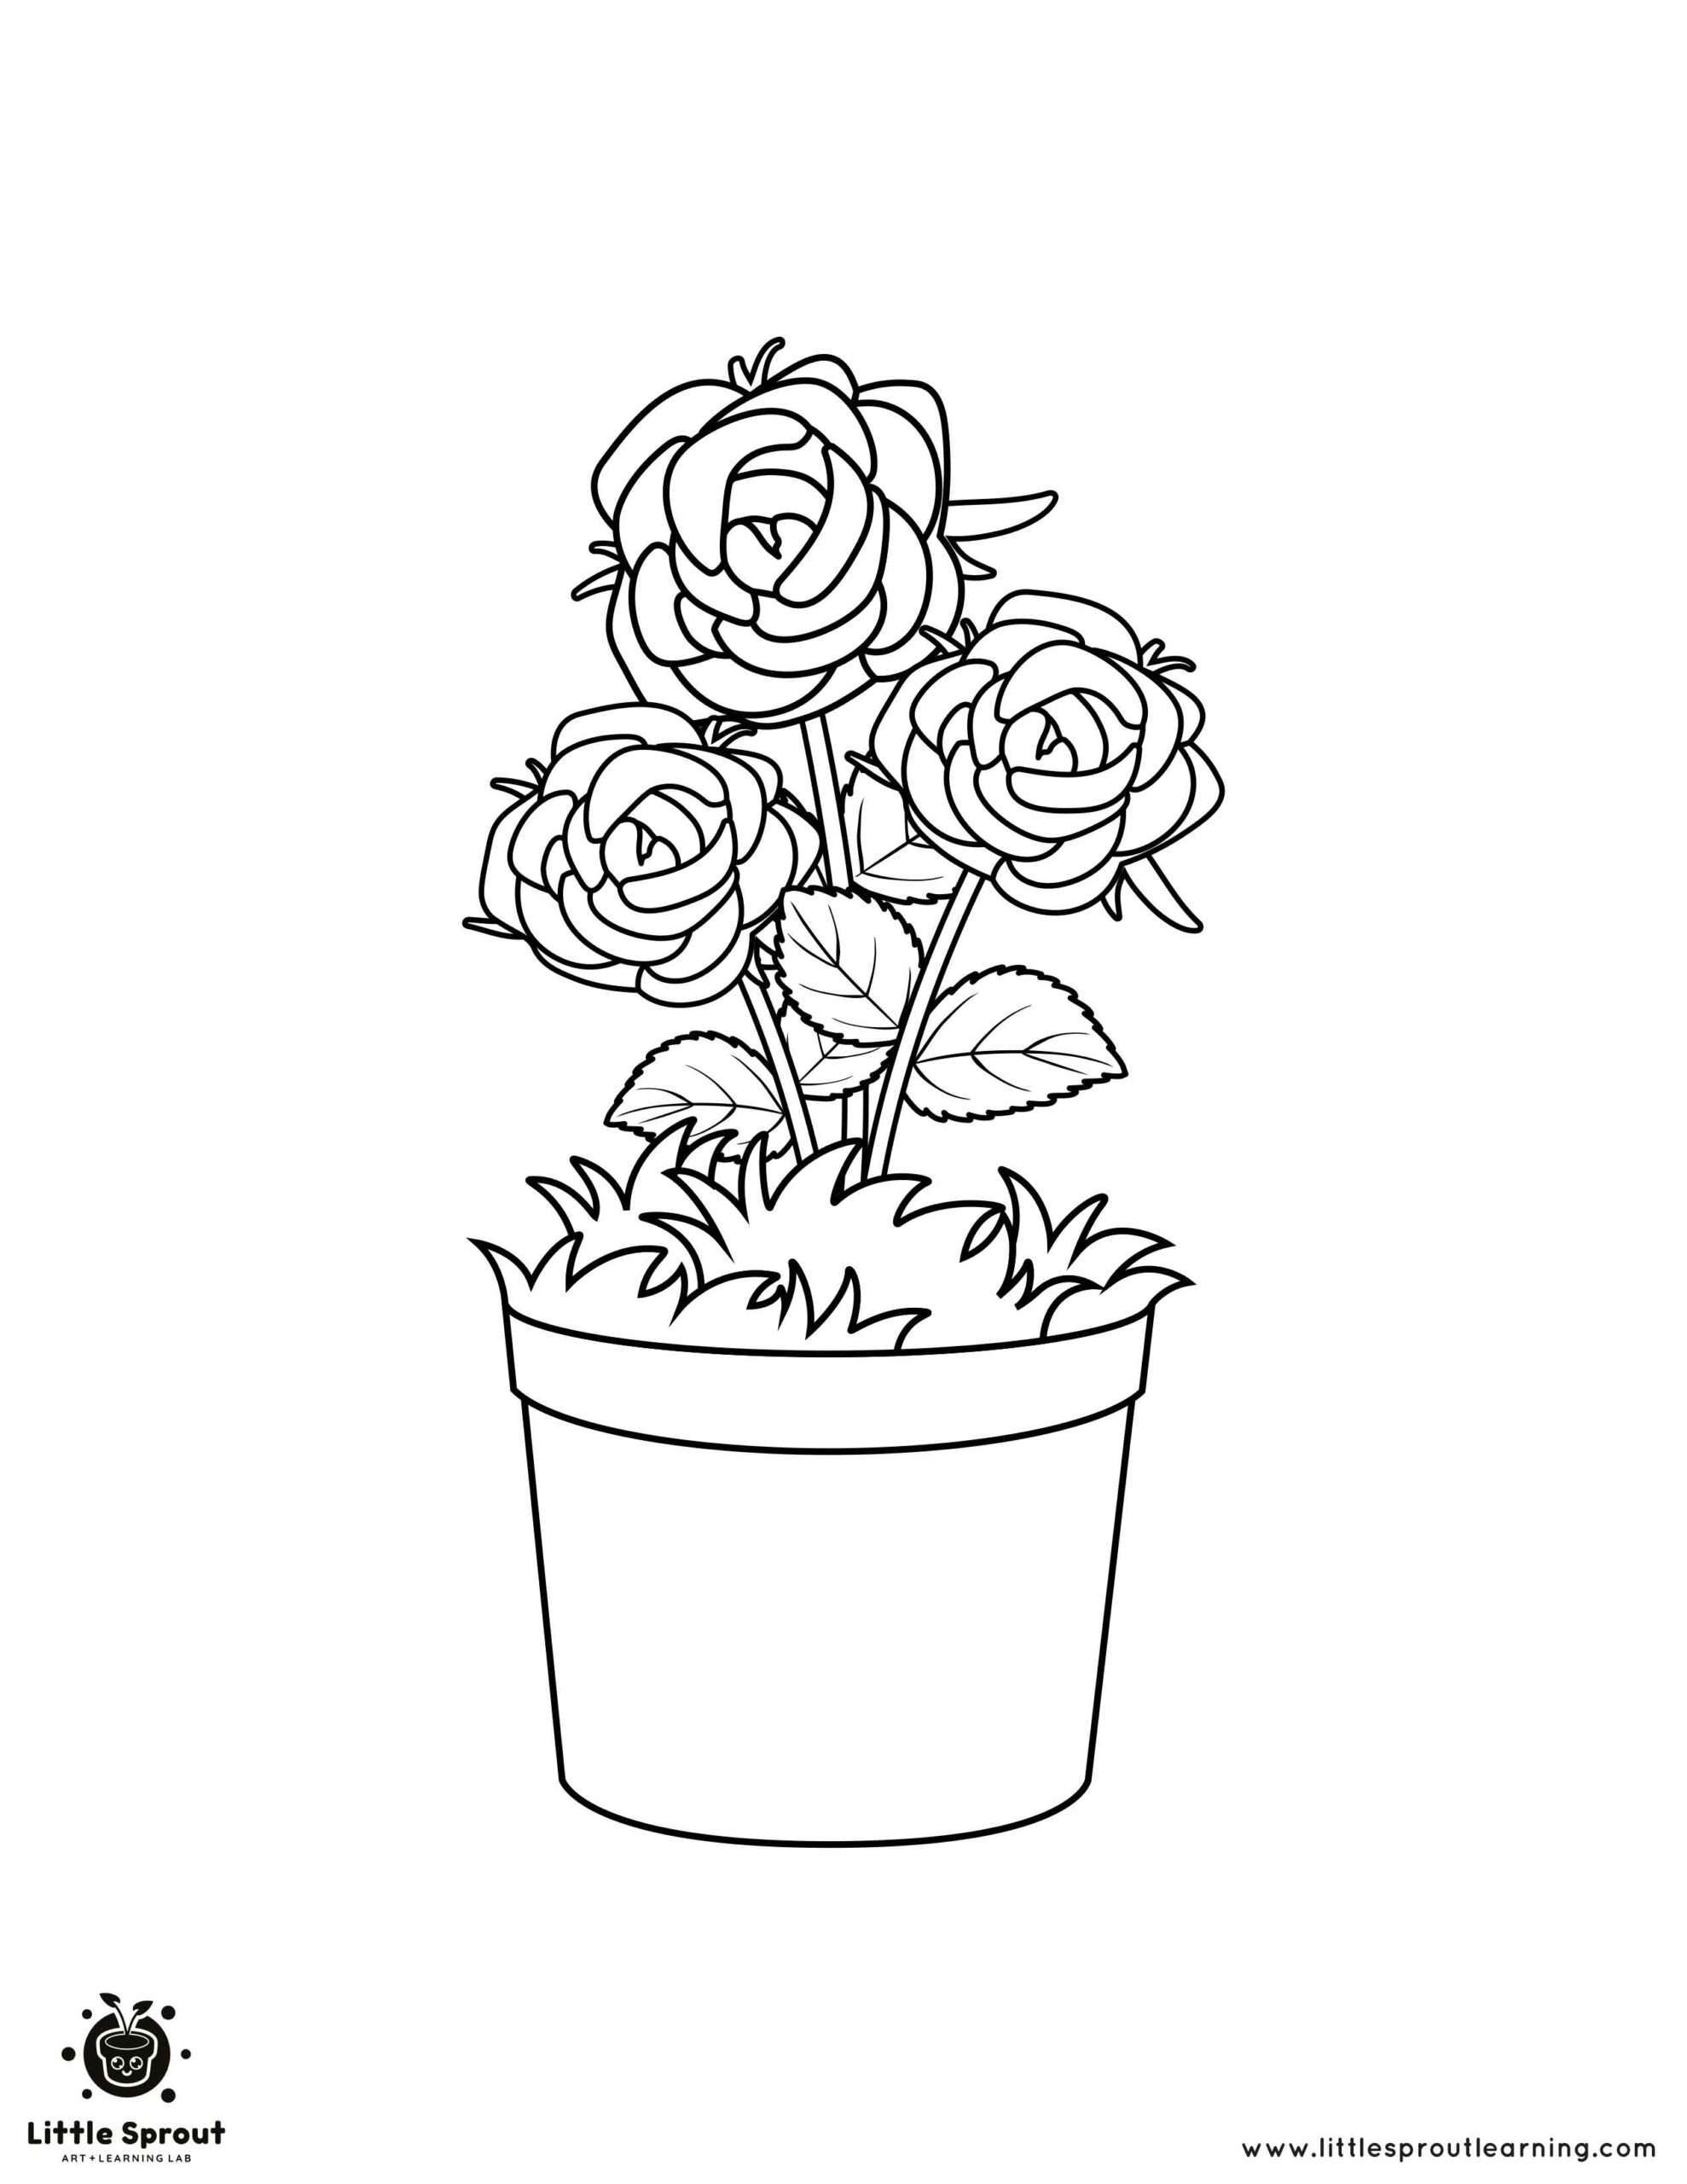 Thorny Rose Coloring Page